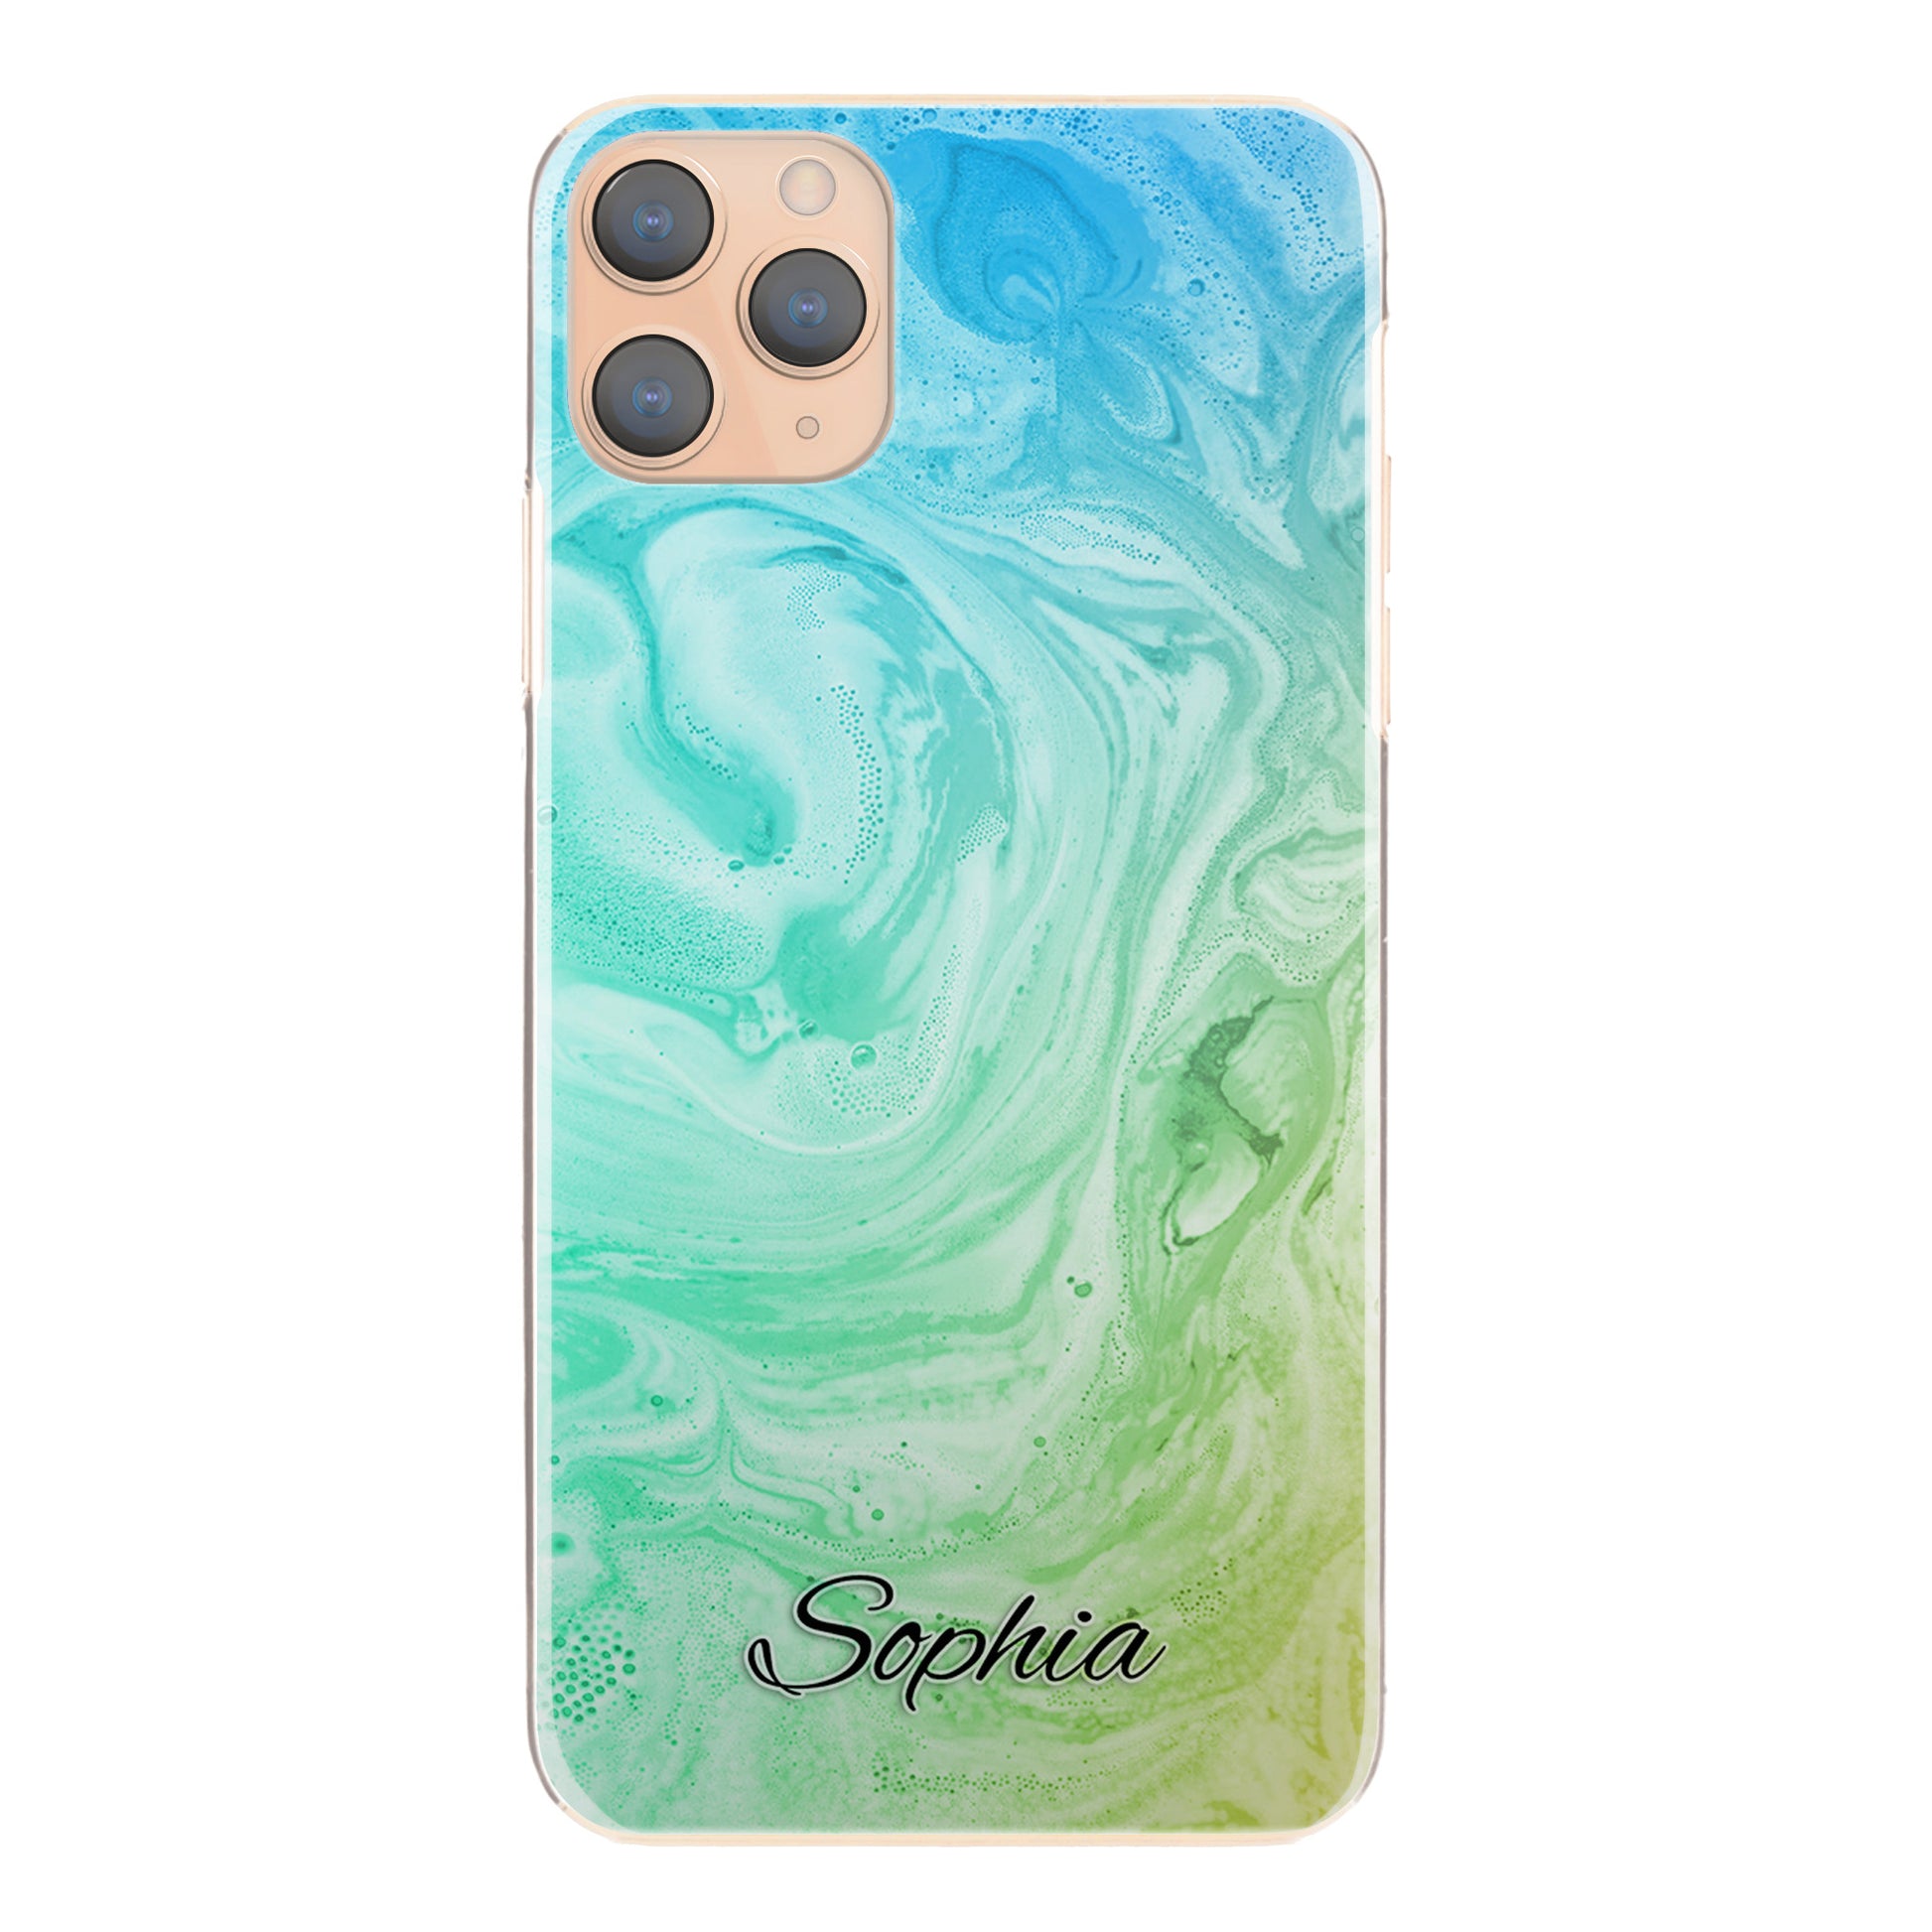 Personalised Samsung Galaxy Phone Hard Case with Stylish Text on Turquoise Gradient Swirled Marble